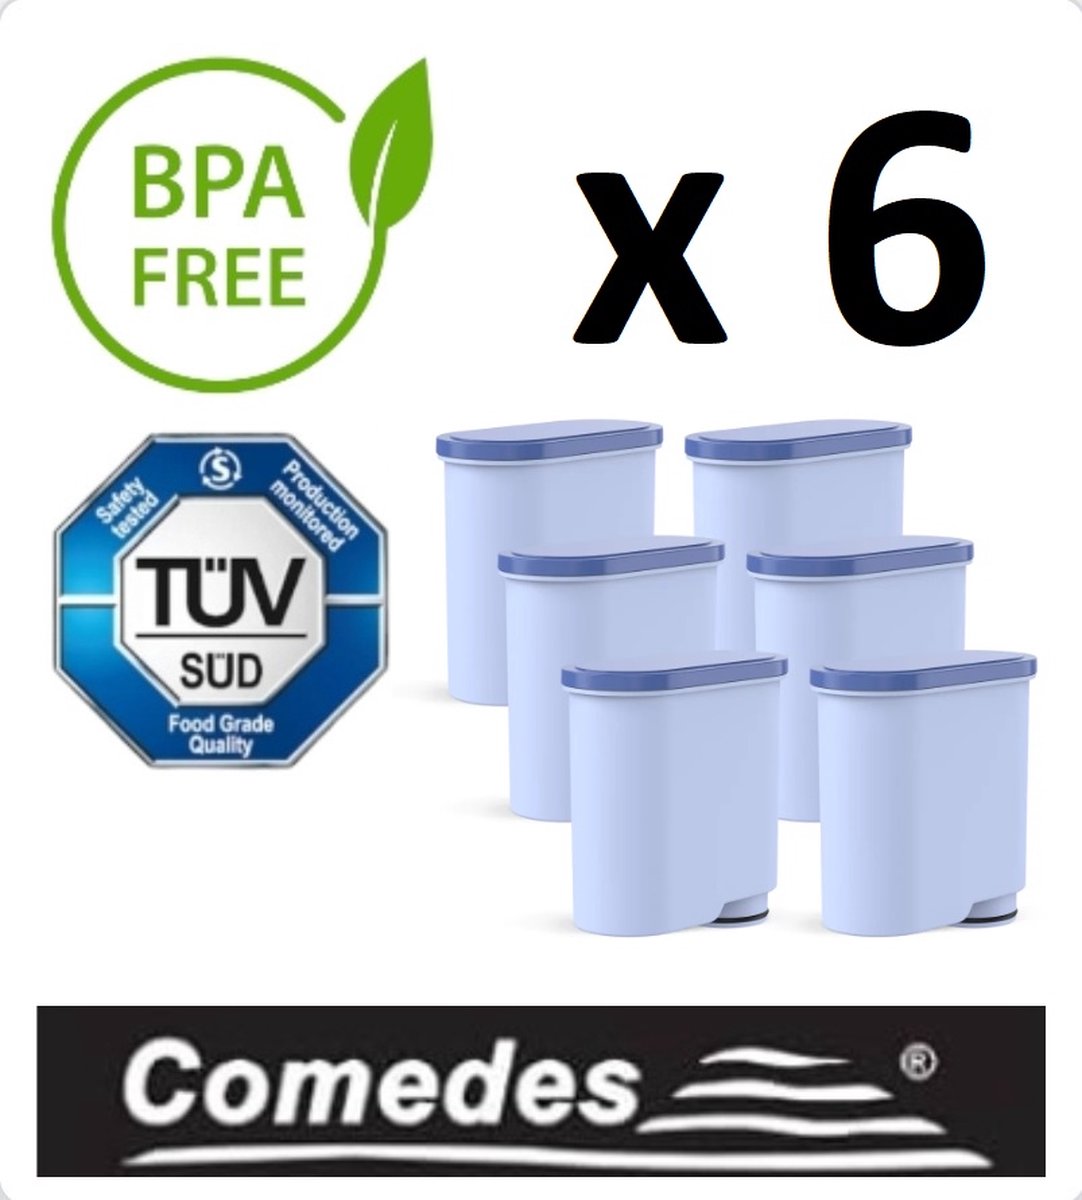 6x COMEDES waterfilter voor Philips Saeco AquaClean koffiemachines, vervangend Philips Saeco filter 6 stuks. Philips CA6903/10 Philips CA6903/22 Philips AquaClean Saeco CA6903/00 Saeco CA6903/01